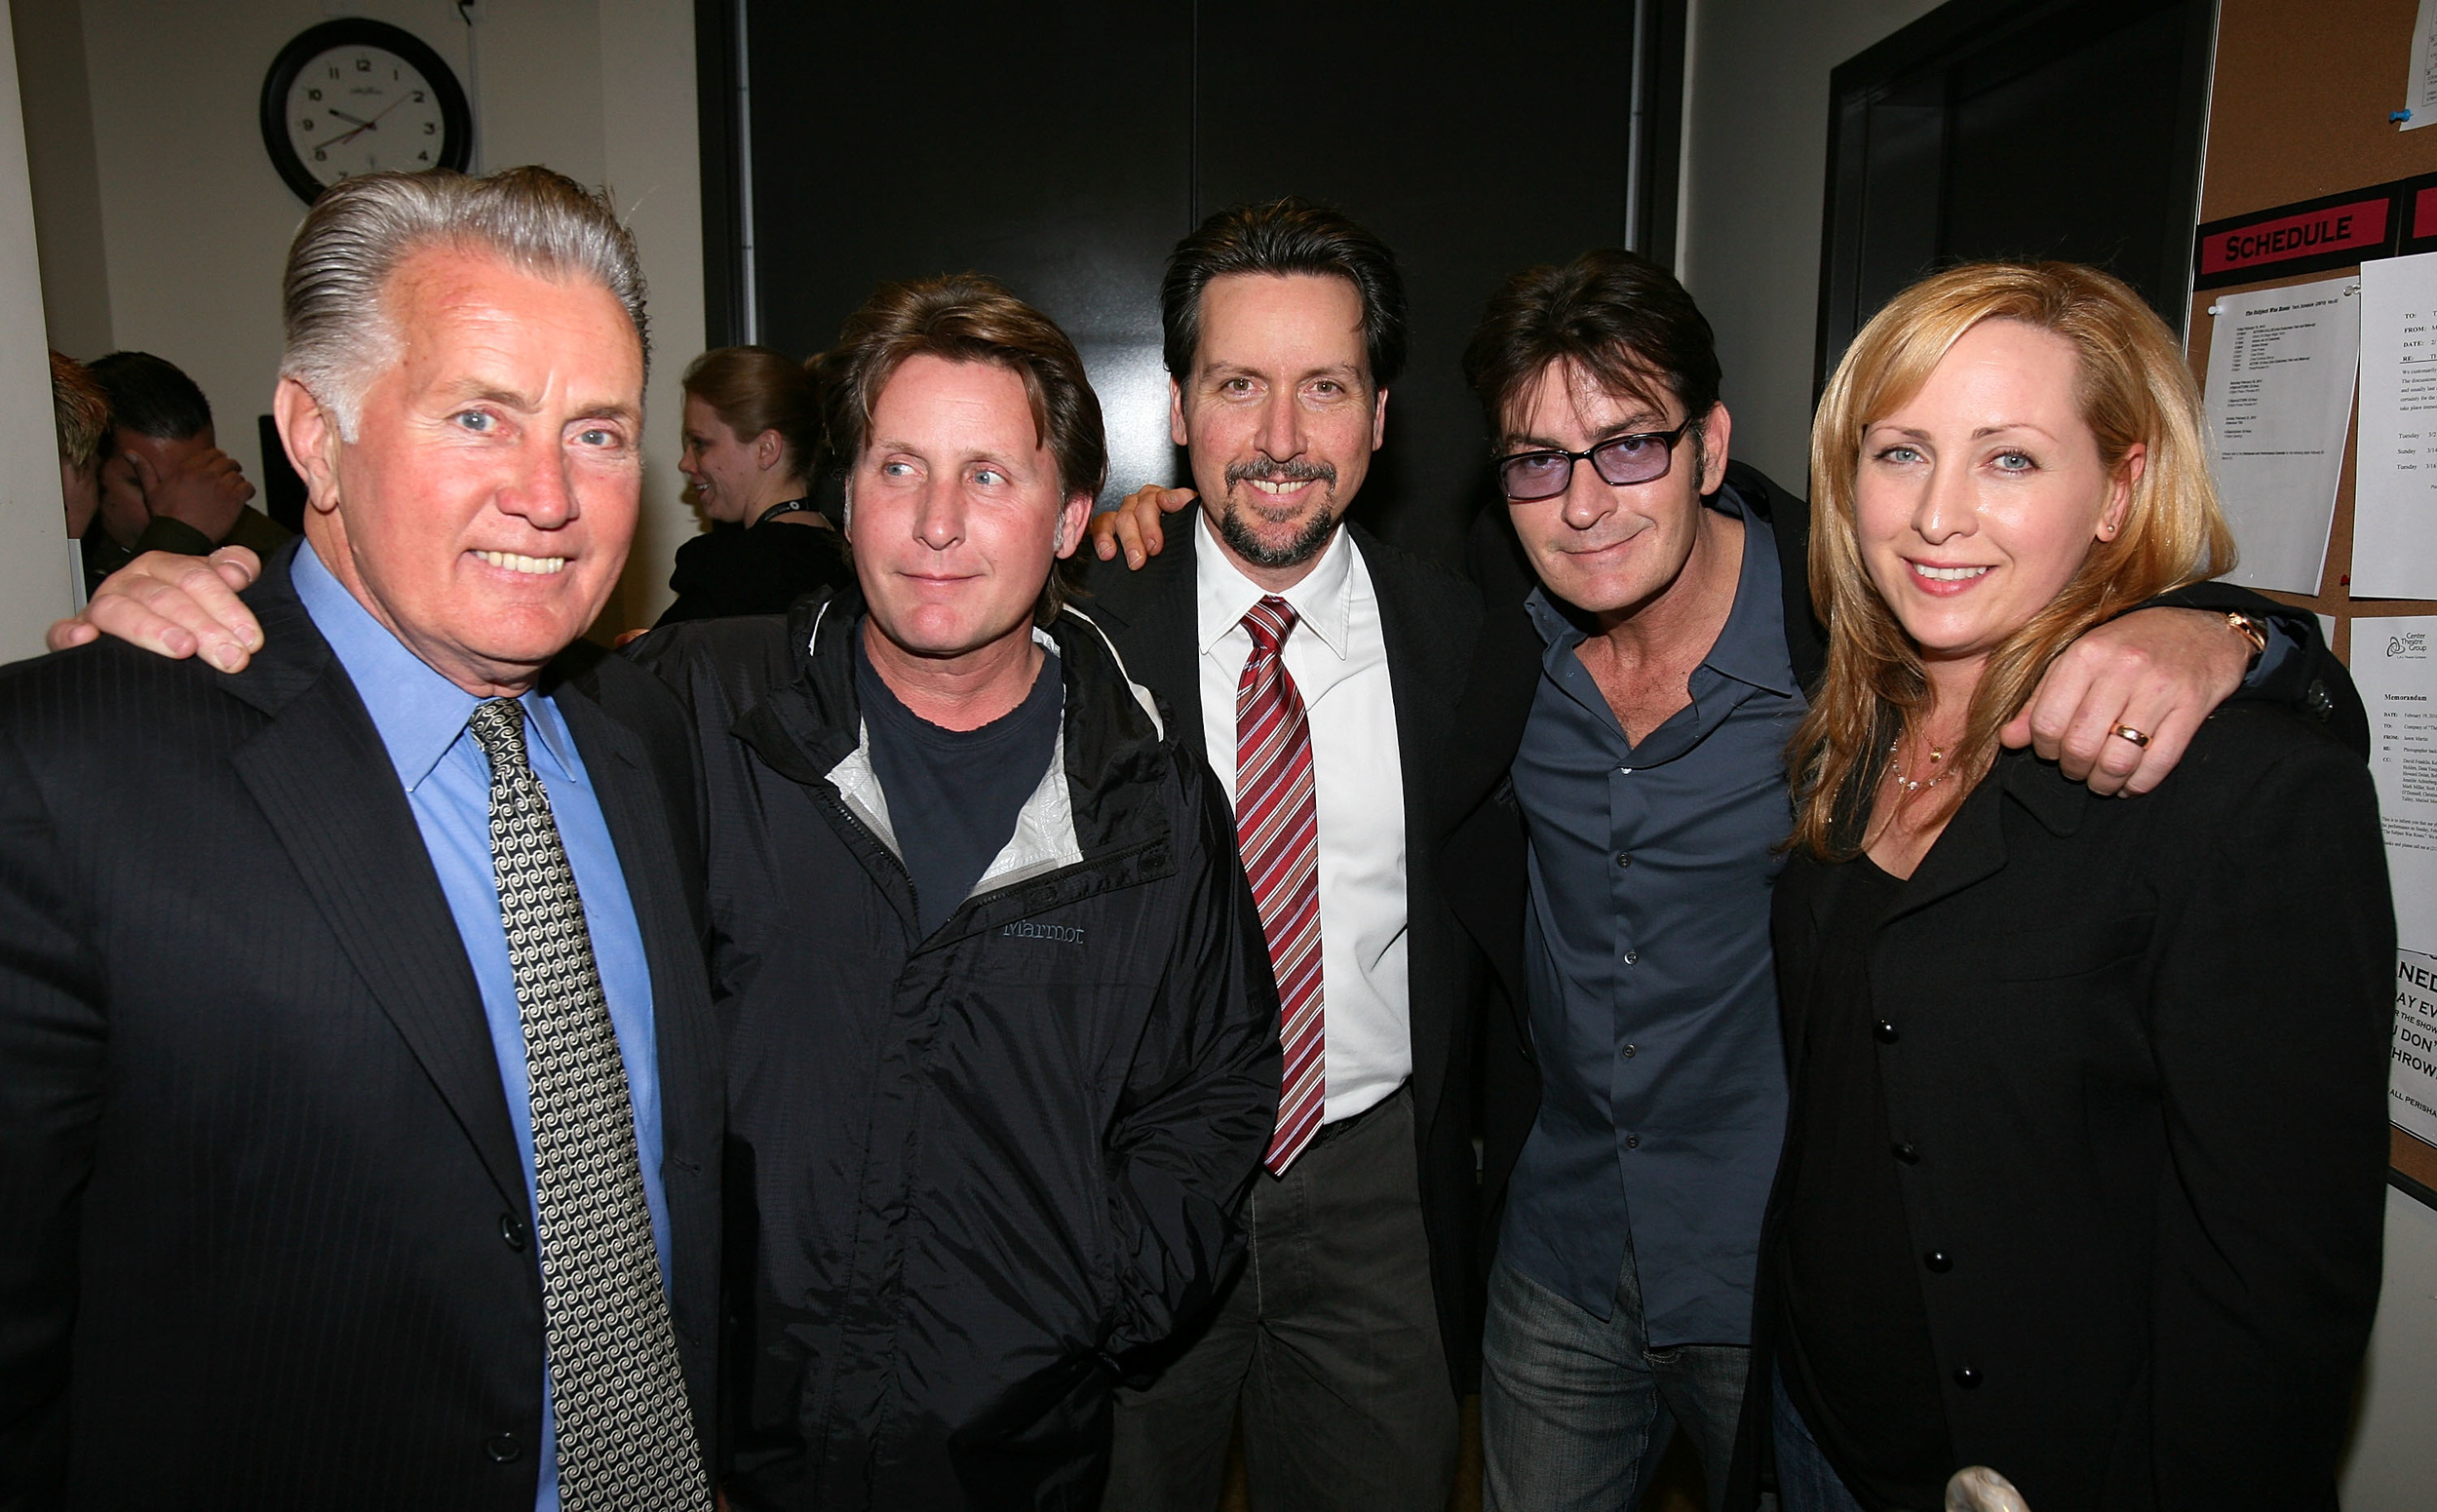 <p>Whether we're talking about Estevez or the family's stage name, Sheen, this group is up there with the most successful and infamous acting families in Hollywood history. Father Martin Sheen (<em>The West Wing, Apocalypse Now</em>) is one of the great actors of all time. Emilio Estevez (<em>The Breakfast Club, The Mighty Ducks</em>) rose to fame as a member of the 1980s "Brat Pack," and Charlie Sheen (<em>Two and a Half Men, Platoon, Wall Street, Major League</em>) is one of the most notorious actors ever to grace a movie or TV screen. Sister Renee Estevez even had her 15 minutes.</p><p><a href='https://www.msn.com/en-us/community/channel/vid-cj9pqbr0vn9in2b6ddcd8sfgpfq6x6utp44fssrv6mc2gtybw0us'>Follow us on MSN to see more of our exclusive entertainment content.</a></p>